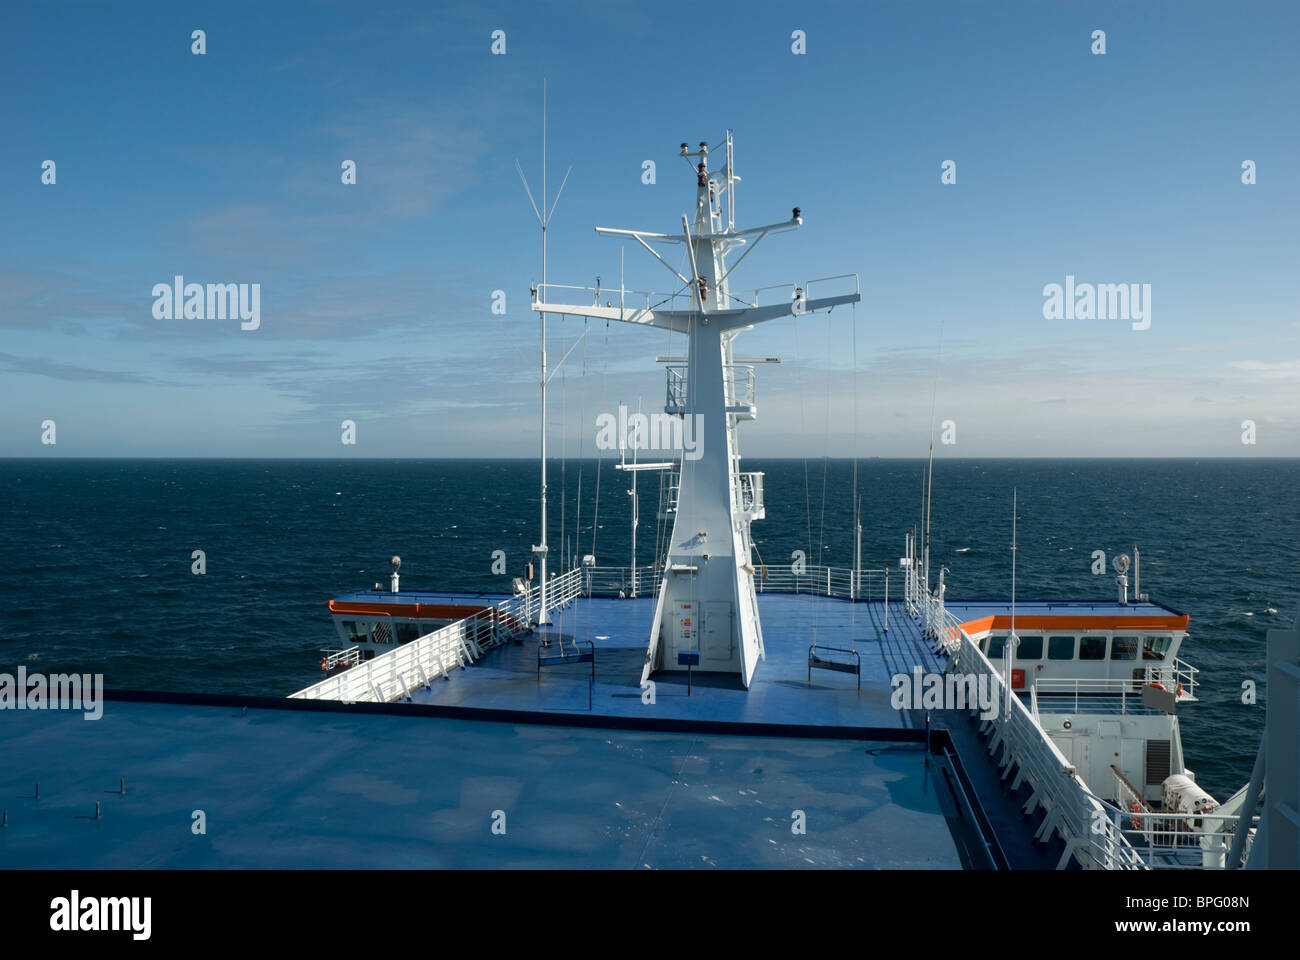 Communication antennas onboard a car ferry Stock Photo